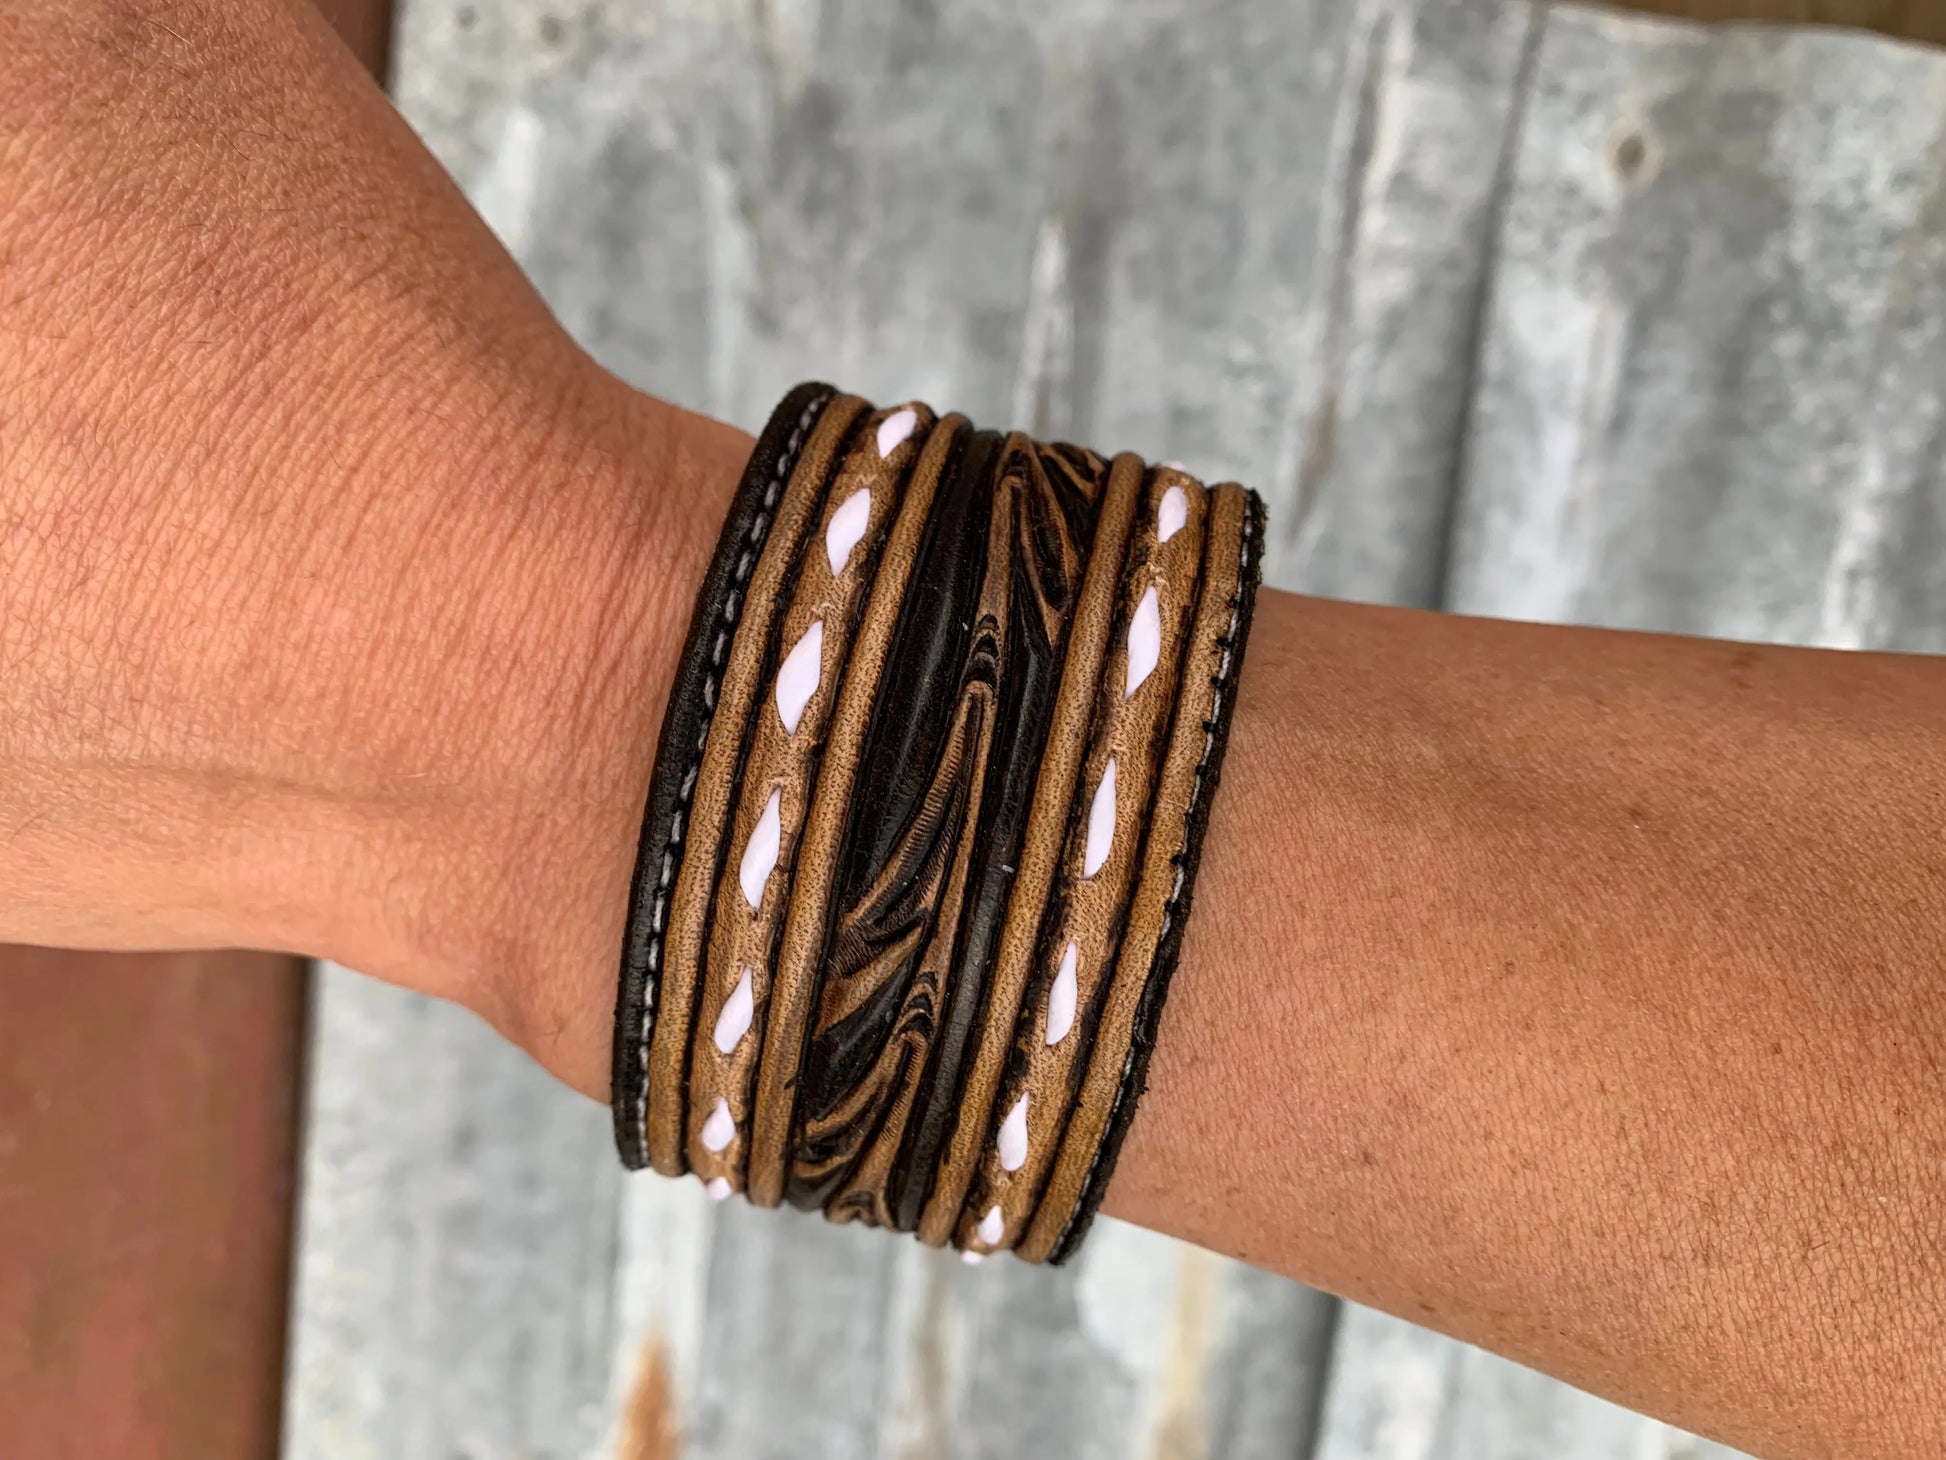 The Vear Hand Tooled leather Cuff Bracelet with Buckstitching The Rodeo Rose